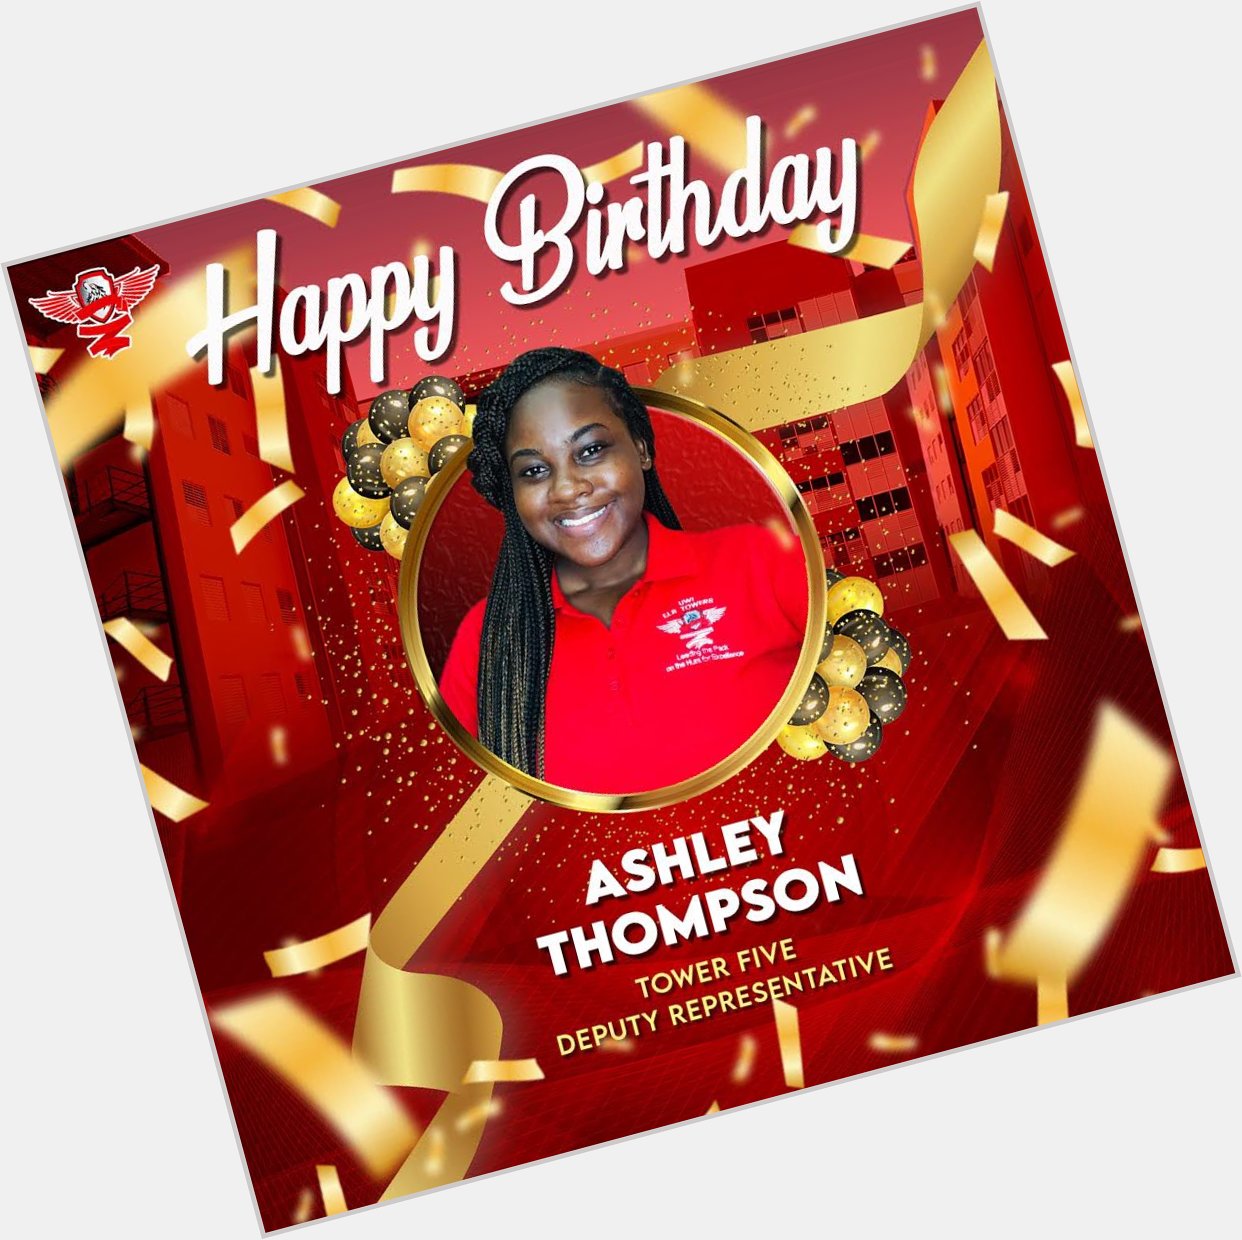 Happy Birthday to our Tower Five Deputy Representative, Ashley Thompson. 

We hope you have an amazing day! 